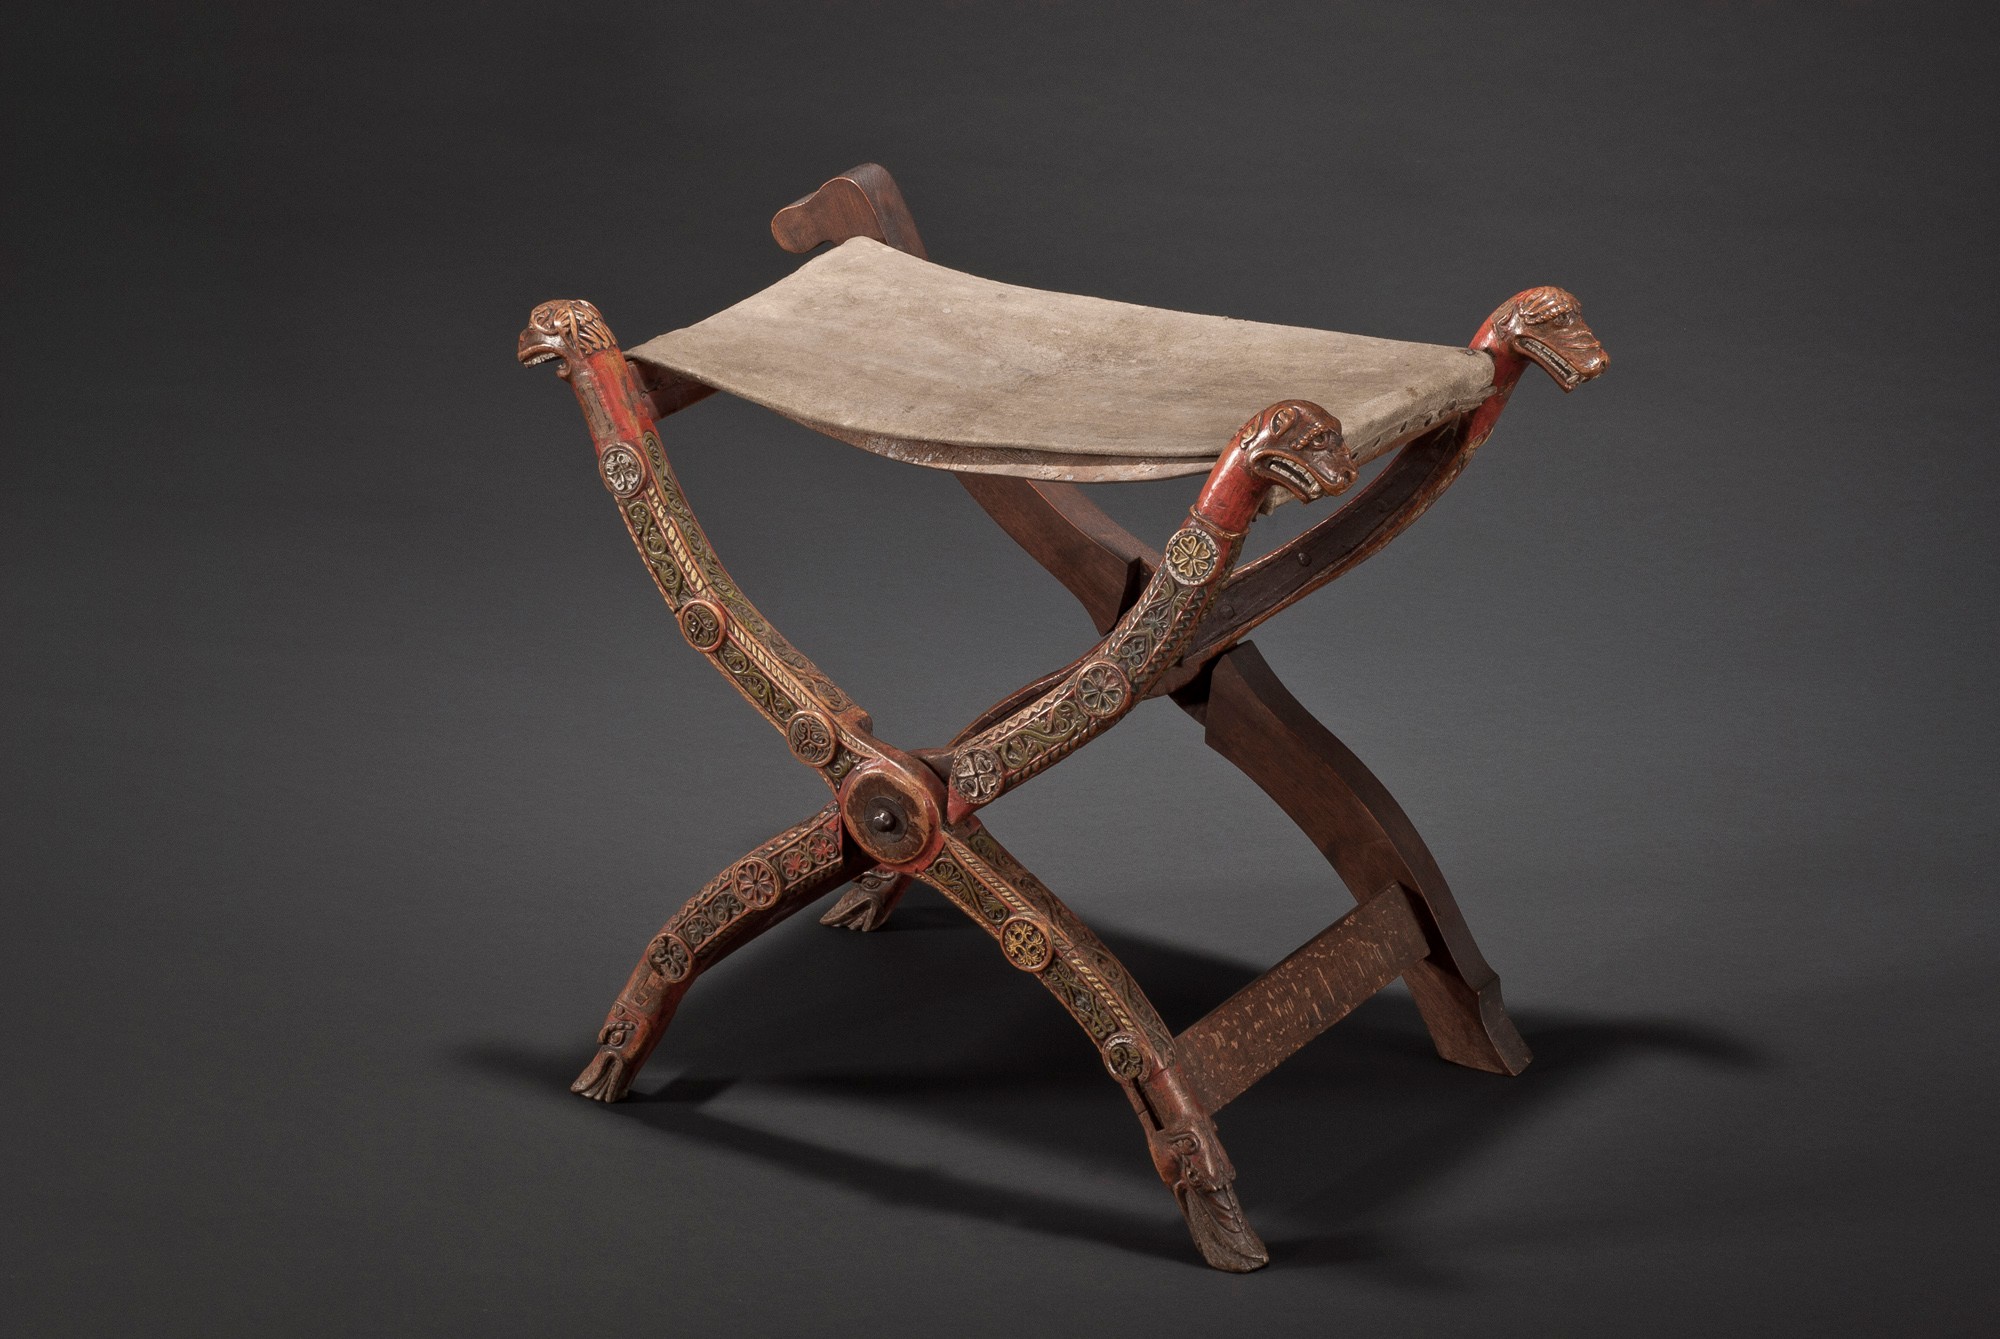 FOLDING STOOL FROM THE ABBEY OF ADMONT